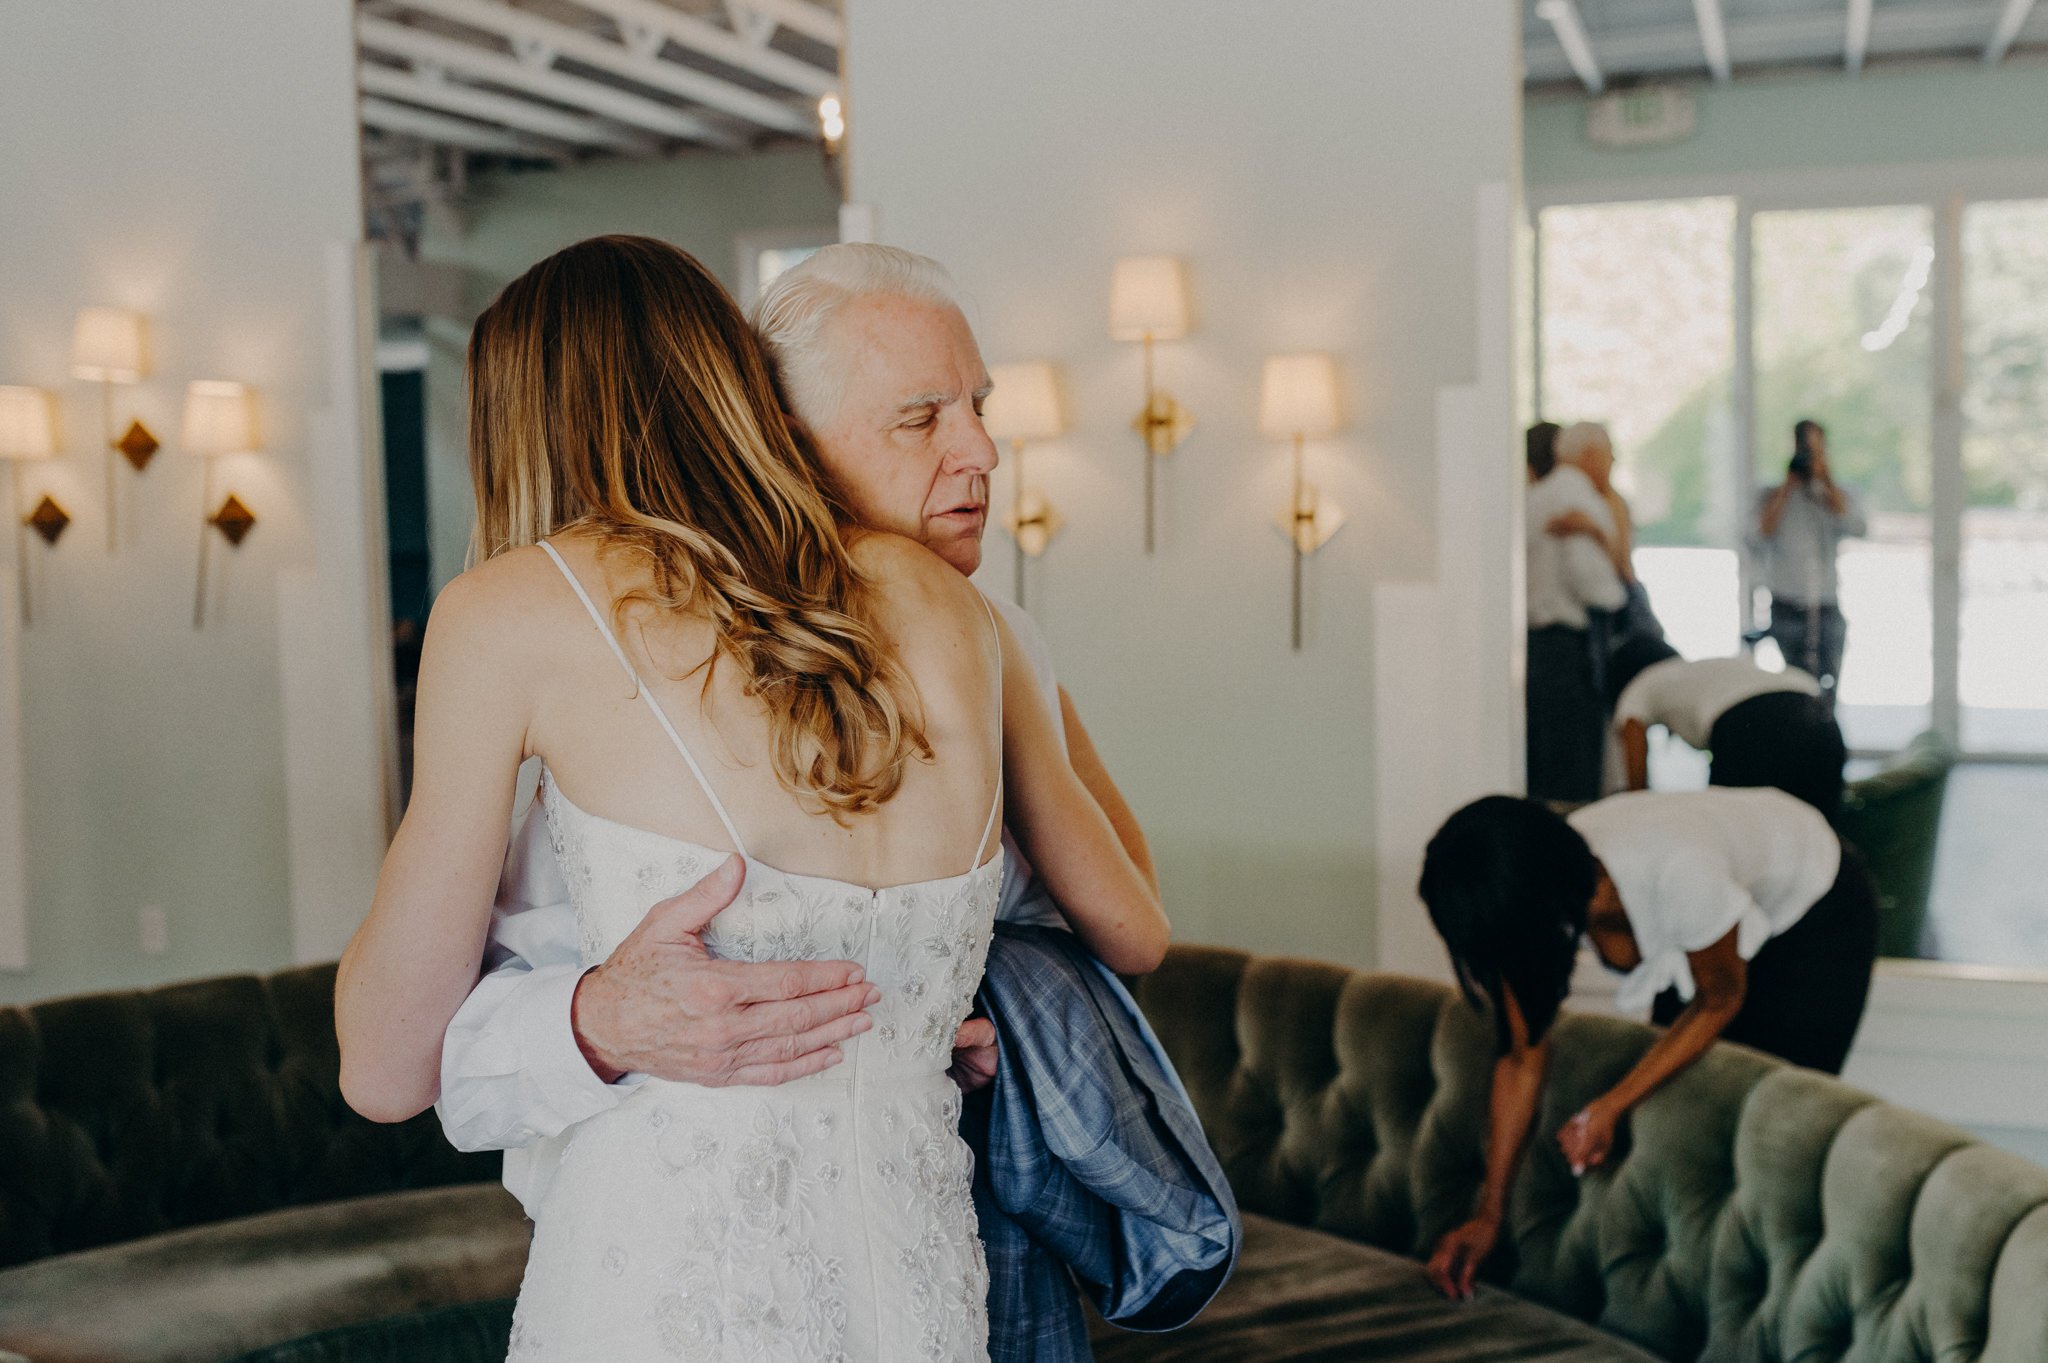 the fig house wedding - queer wedding photographers in los angeles - itlaphoto.com-34.jpg